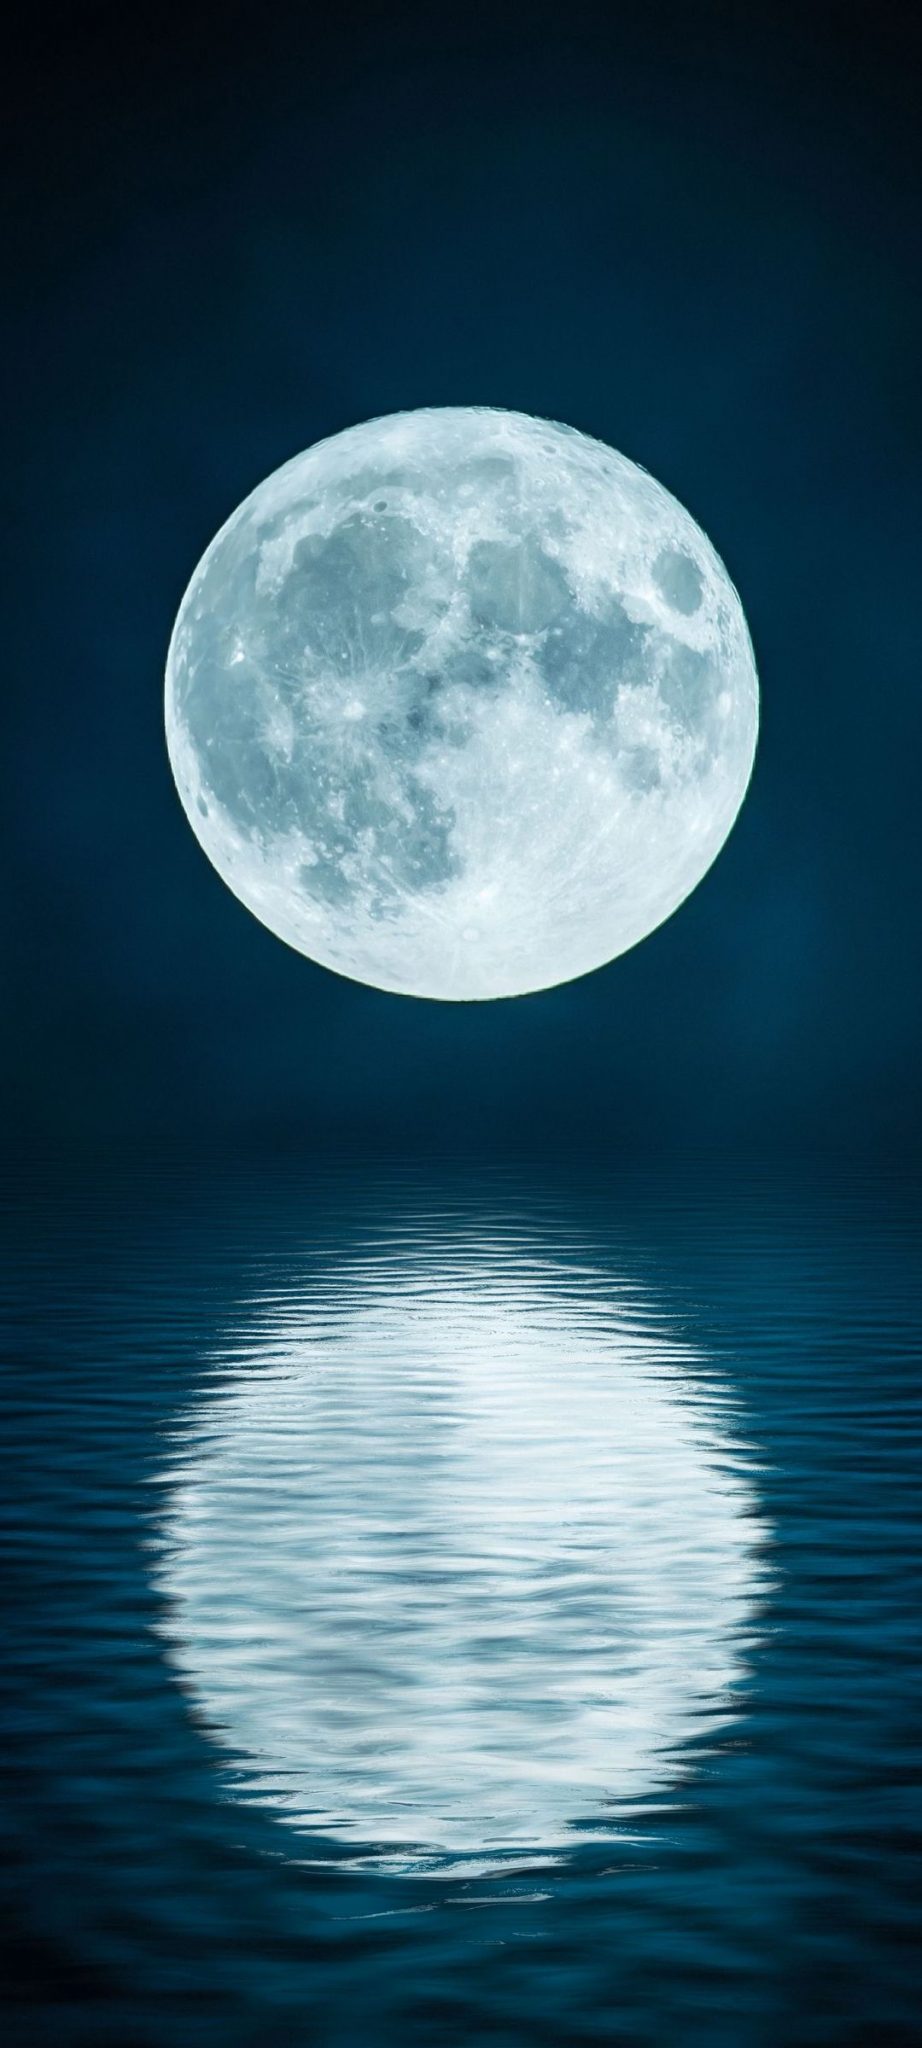 moon and reflection images